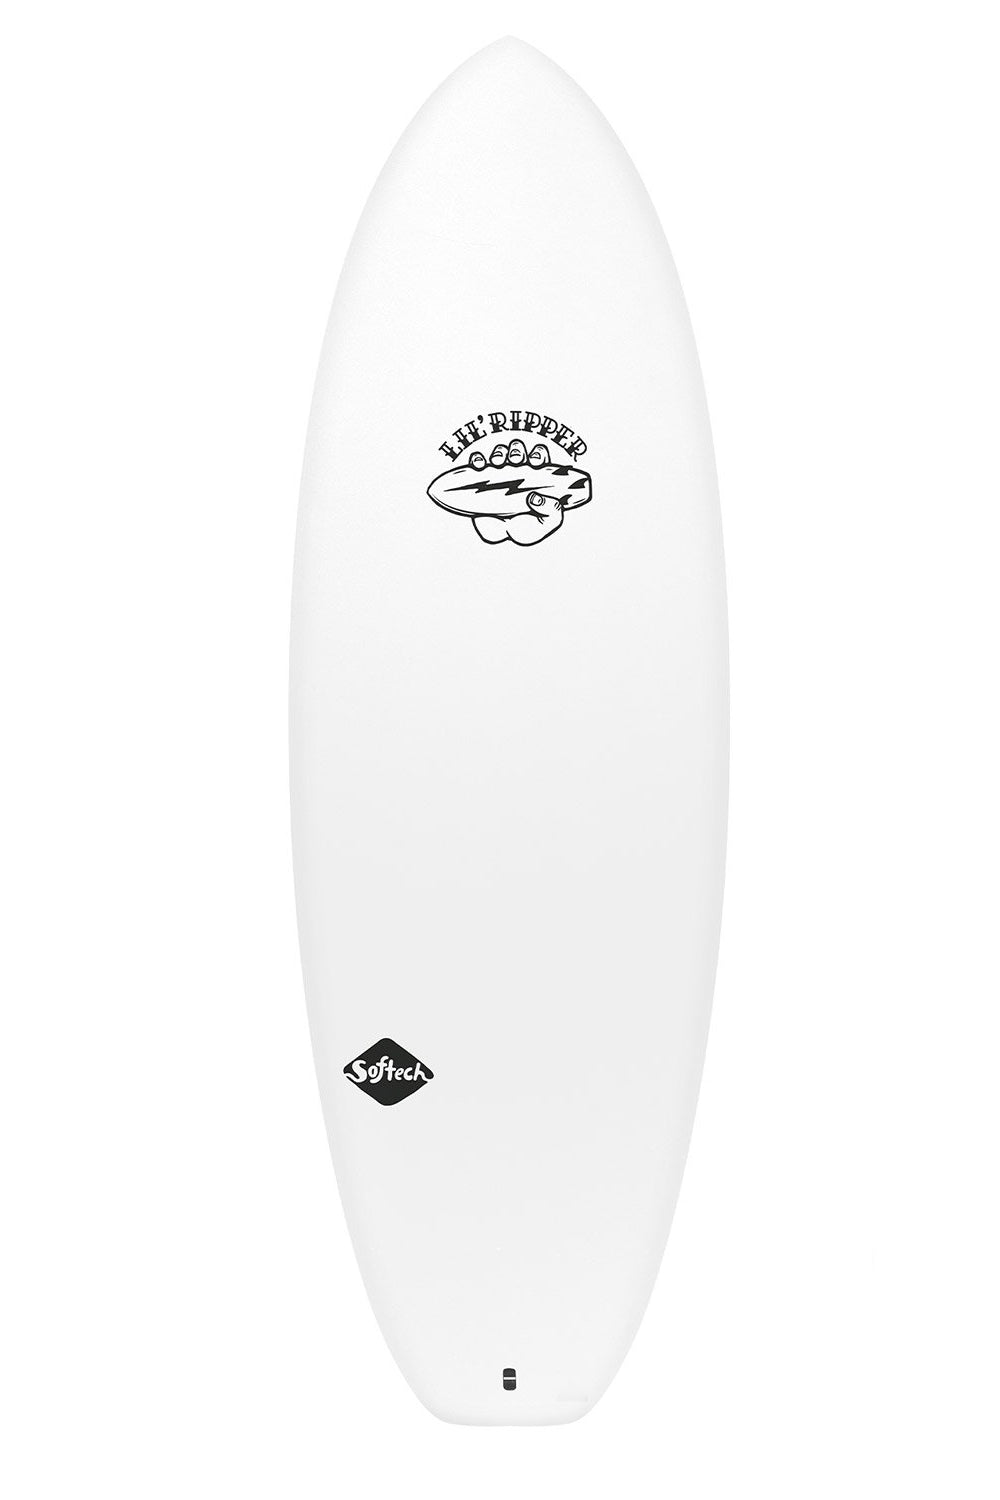 Softech Lil Ripper Softboard - Comes with fins